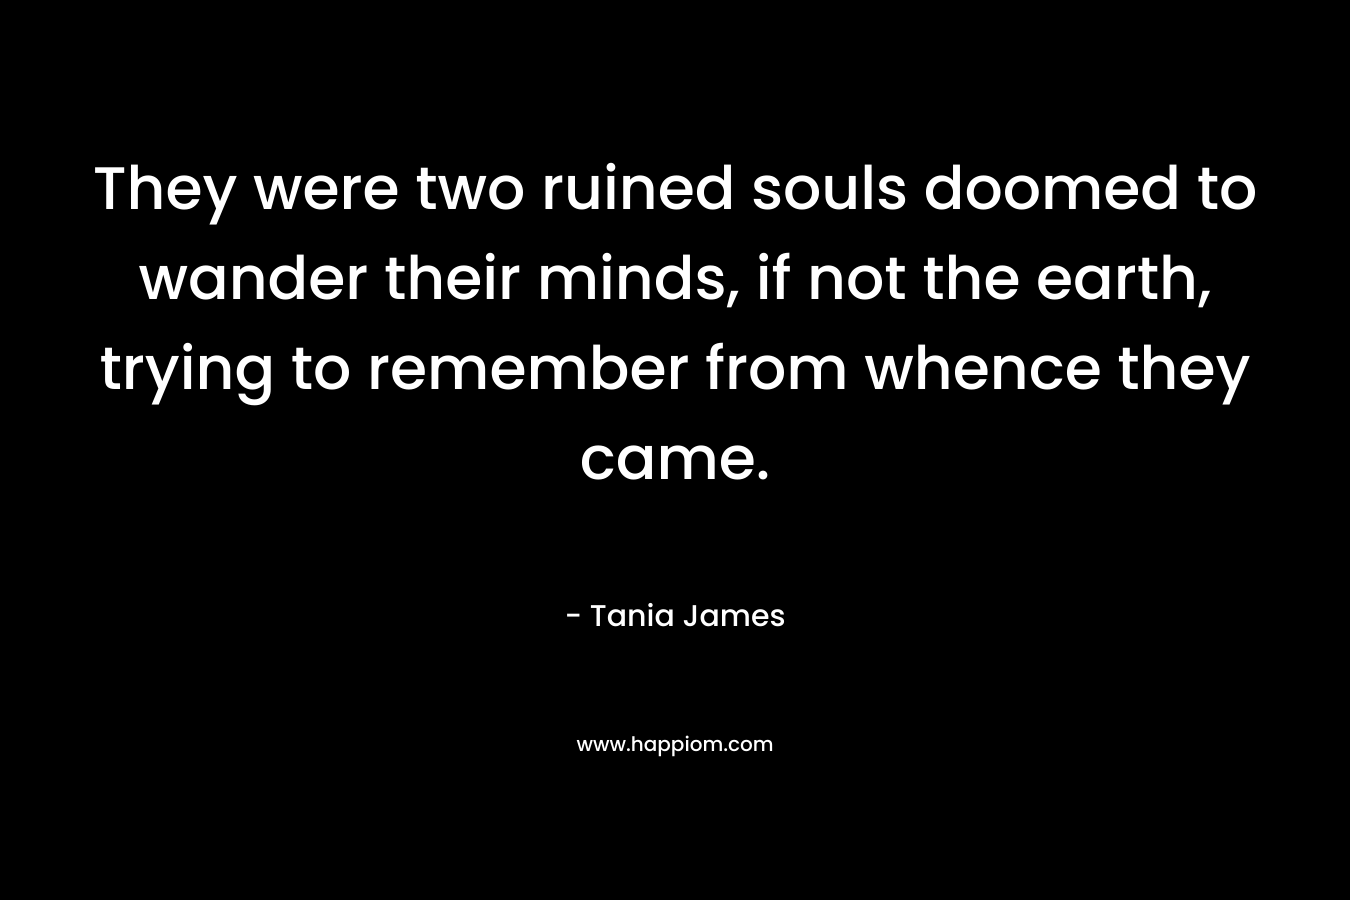 They were two ruined souls doomed to wander their minds, if not the earth, trying to remember from whence they came. – Tania James